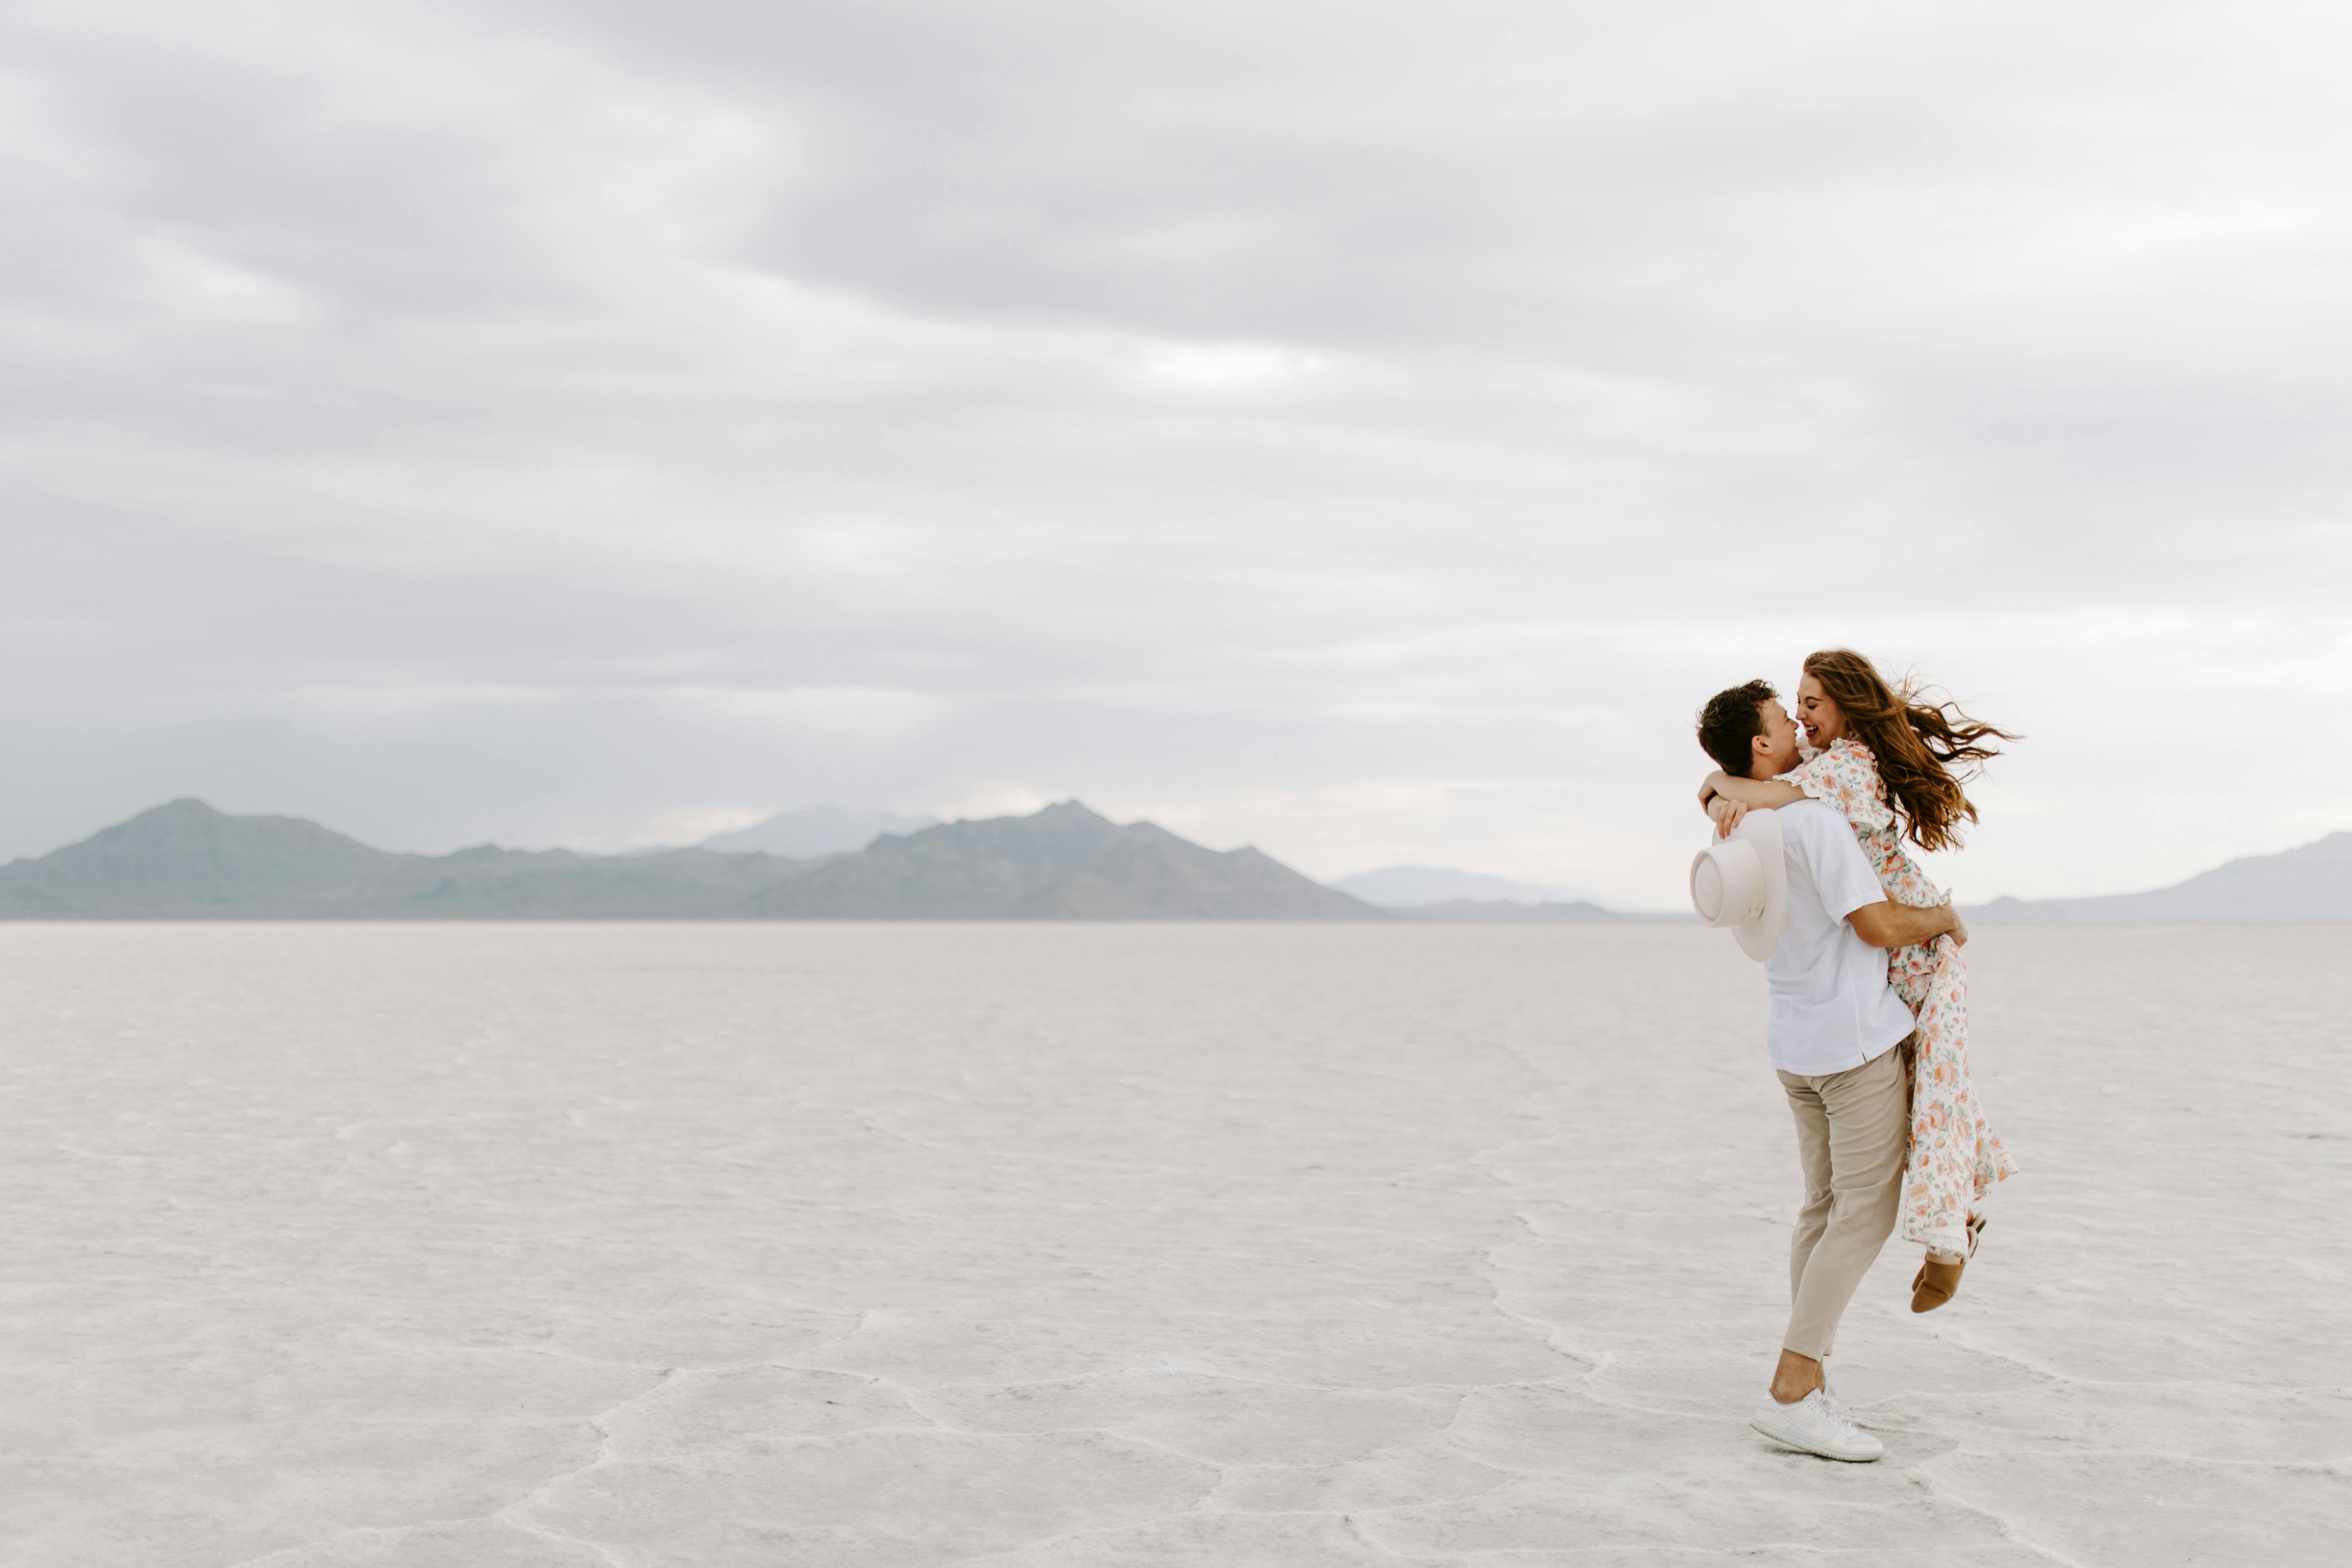 A couple embracing in a white sand desert | Source: Pexels